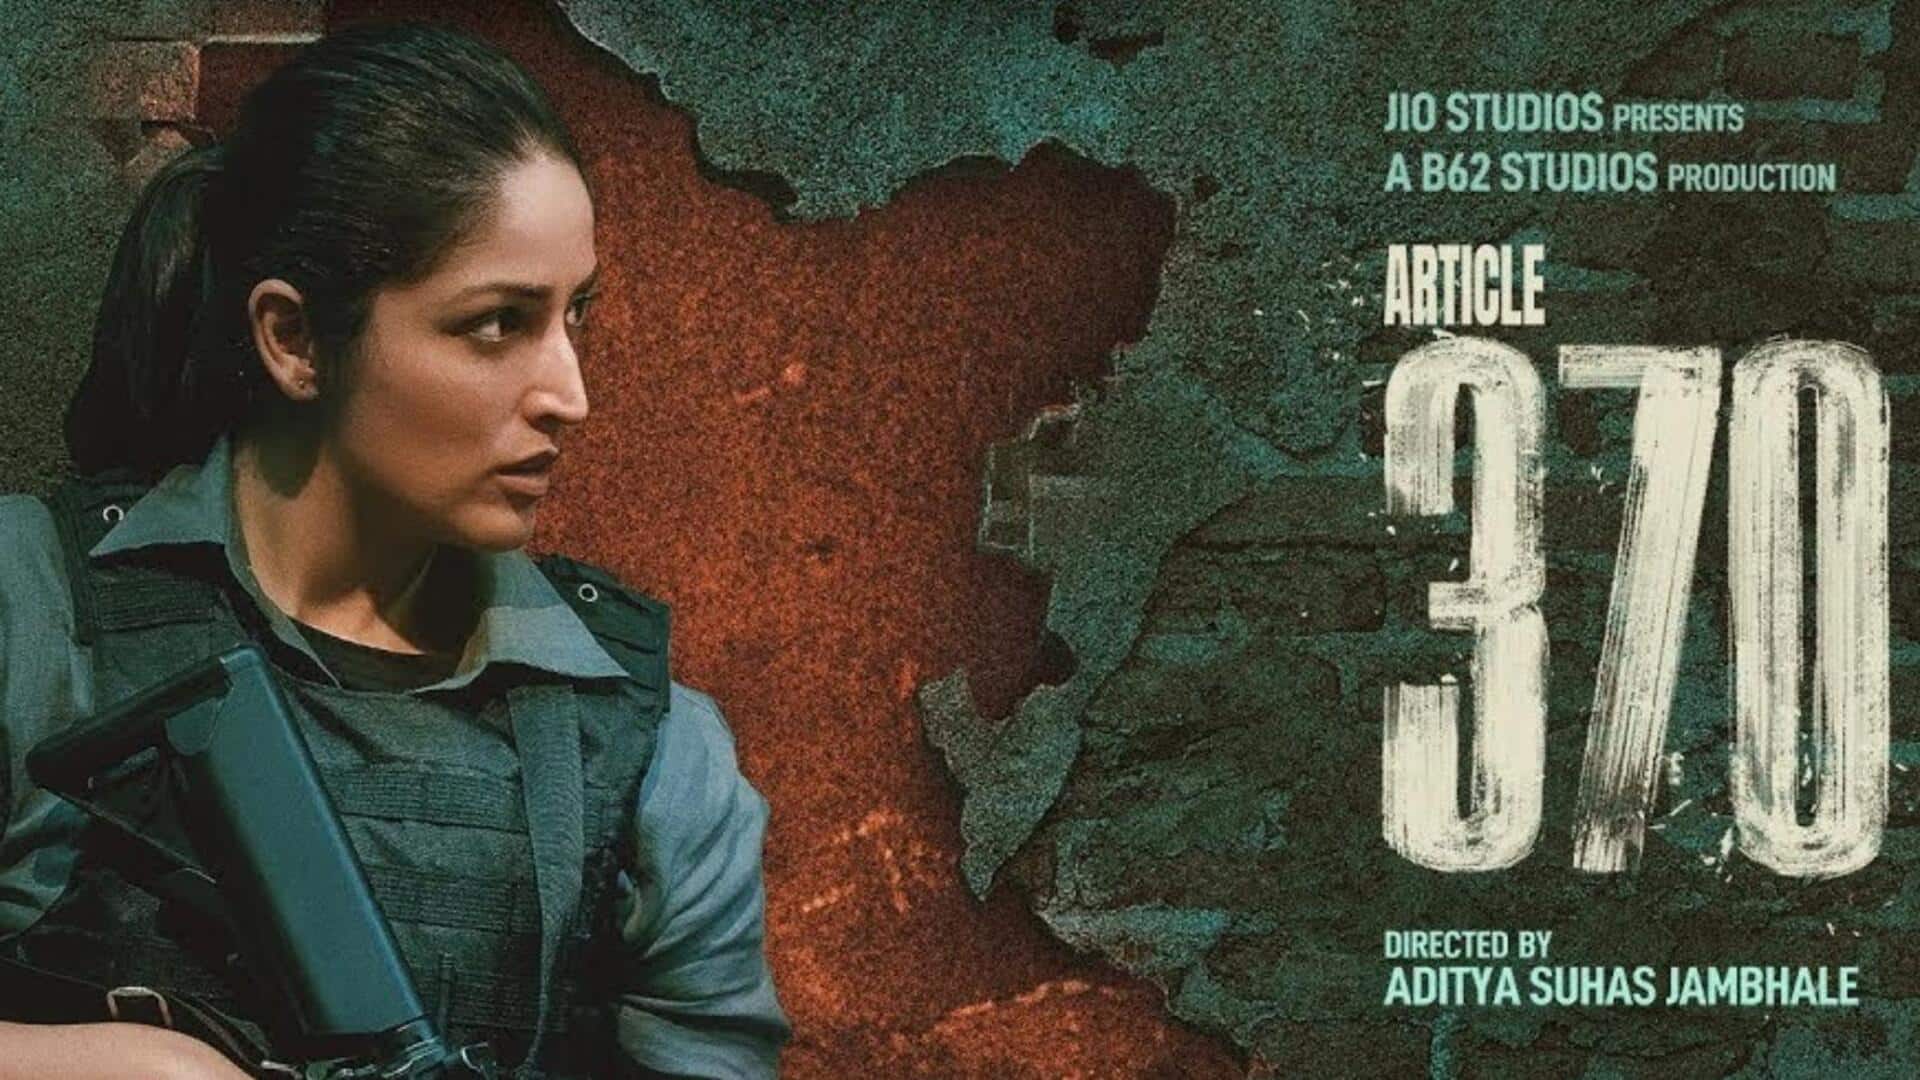 Box office collection: 'Article 370' is on autopilot mode